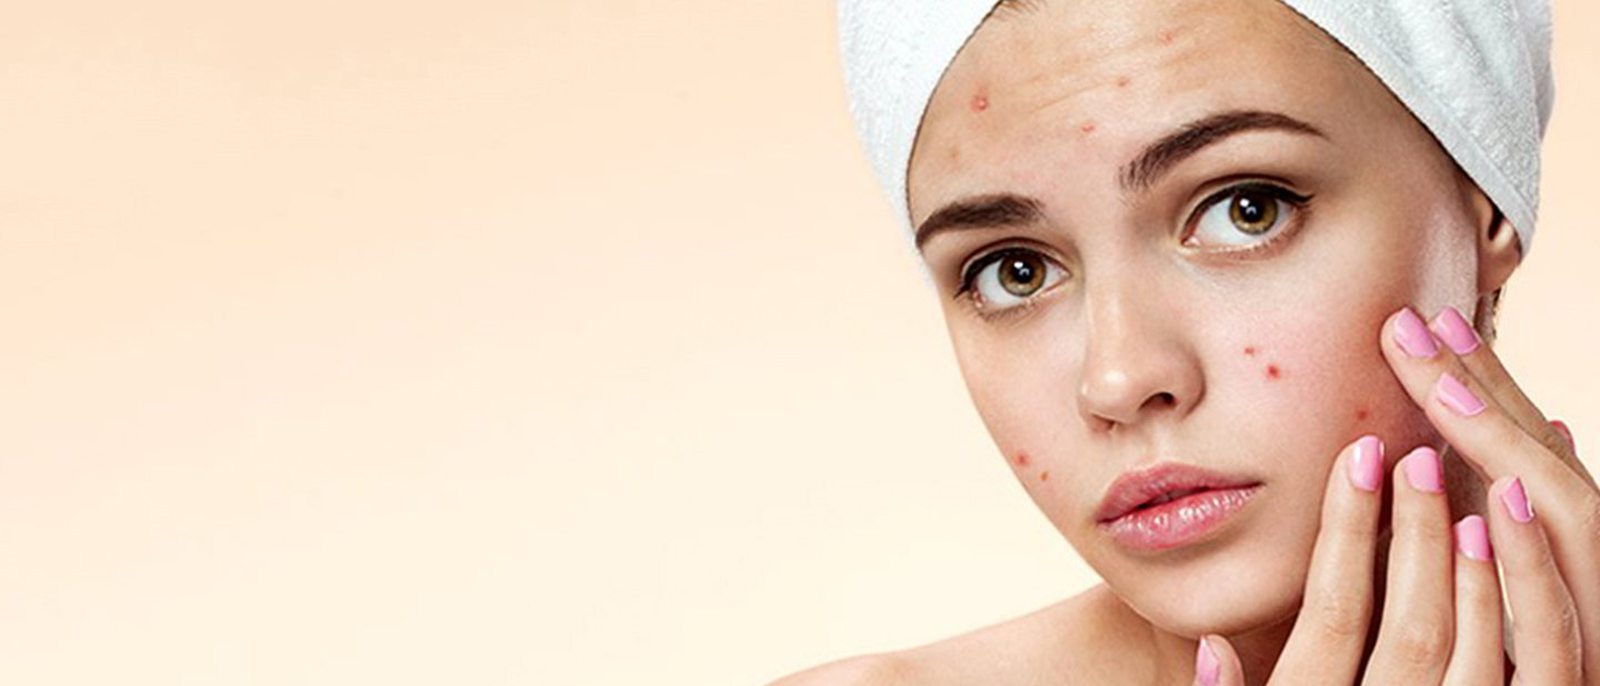 Acne and Scar Treatment